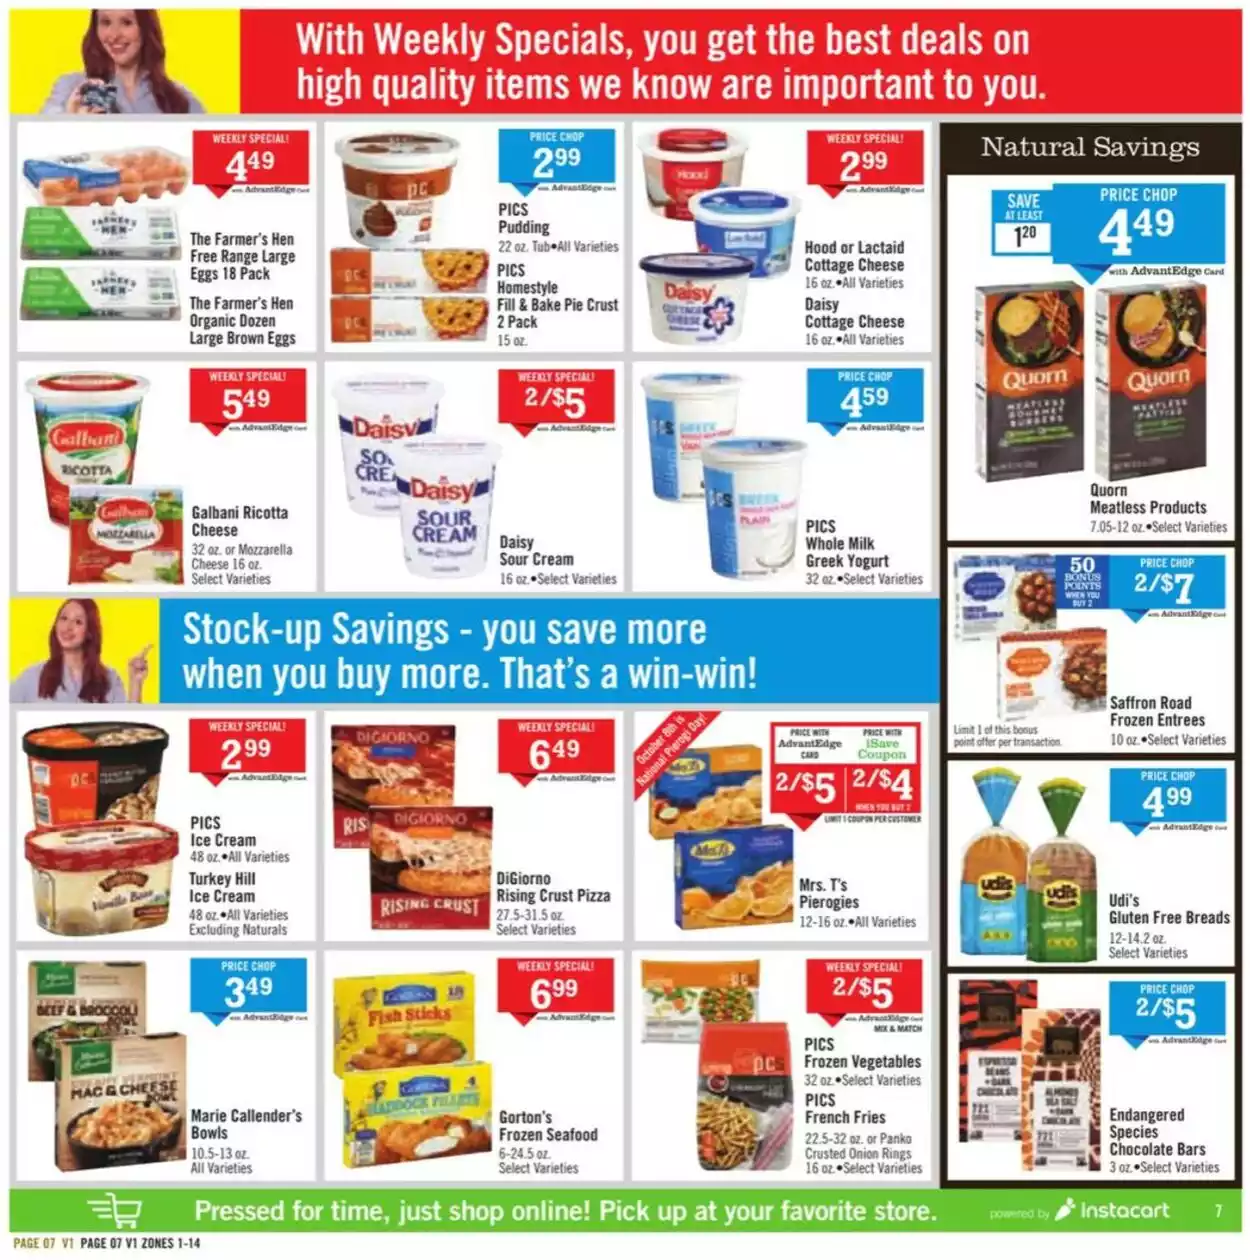 Price Chopper Weekly Ad Preview for March 26 - April 1, 2023 4